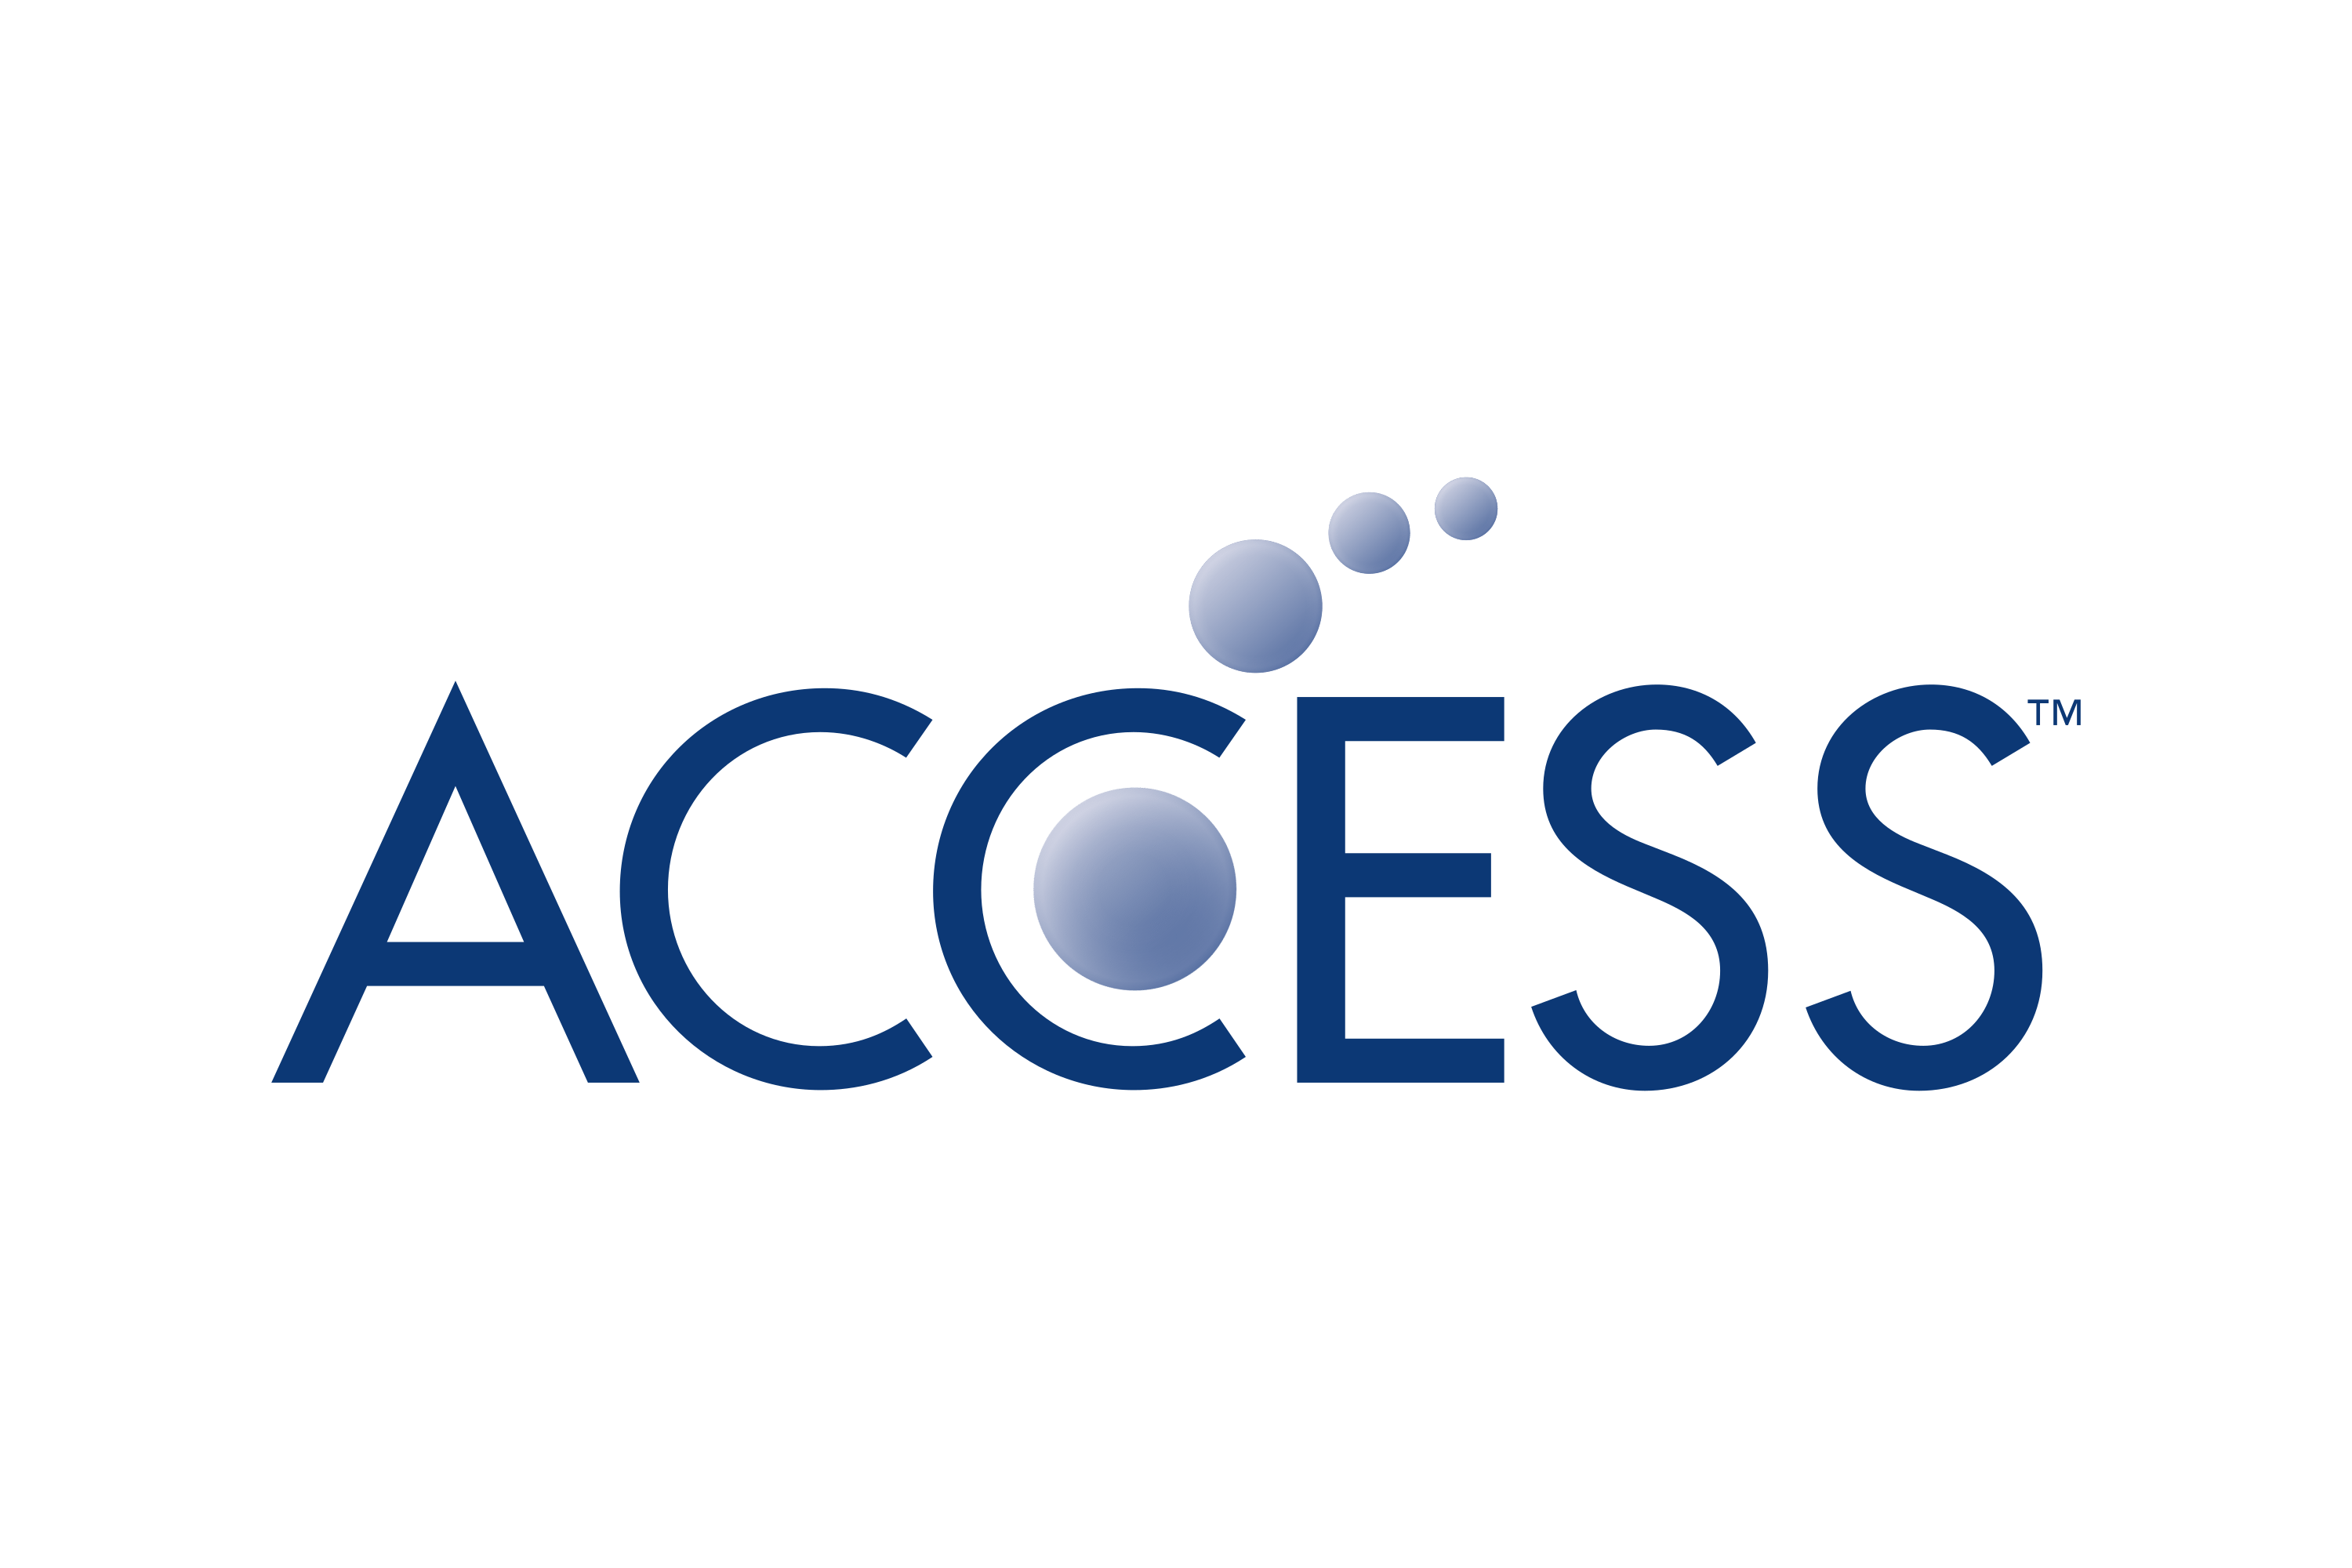 Download Access Logo in SVG Vector or PNG File Format - Logo.wine